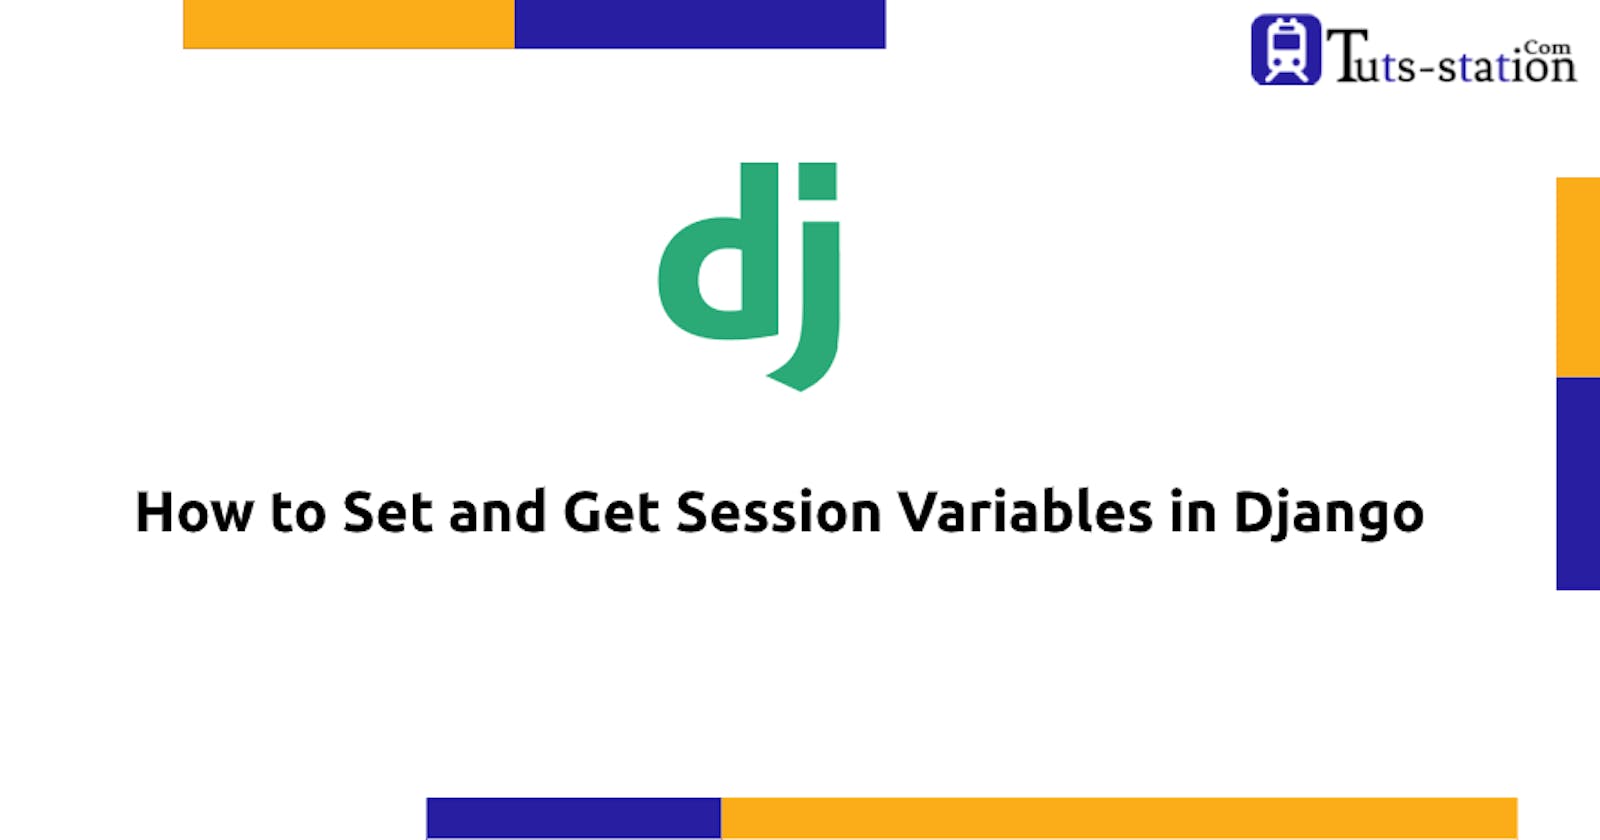 How to Set and Get Session Variables in Django?